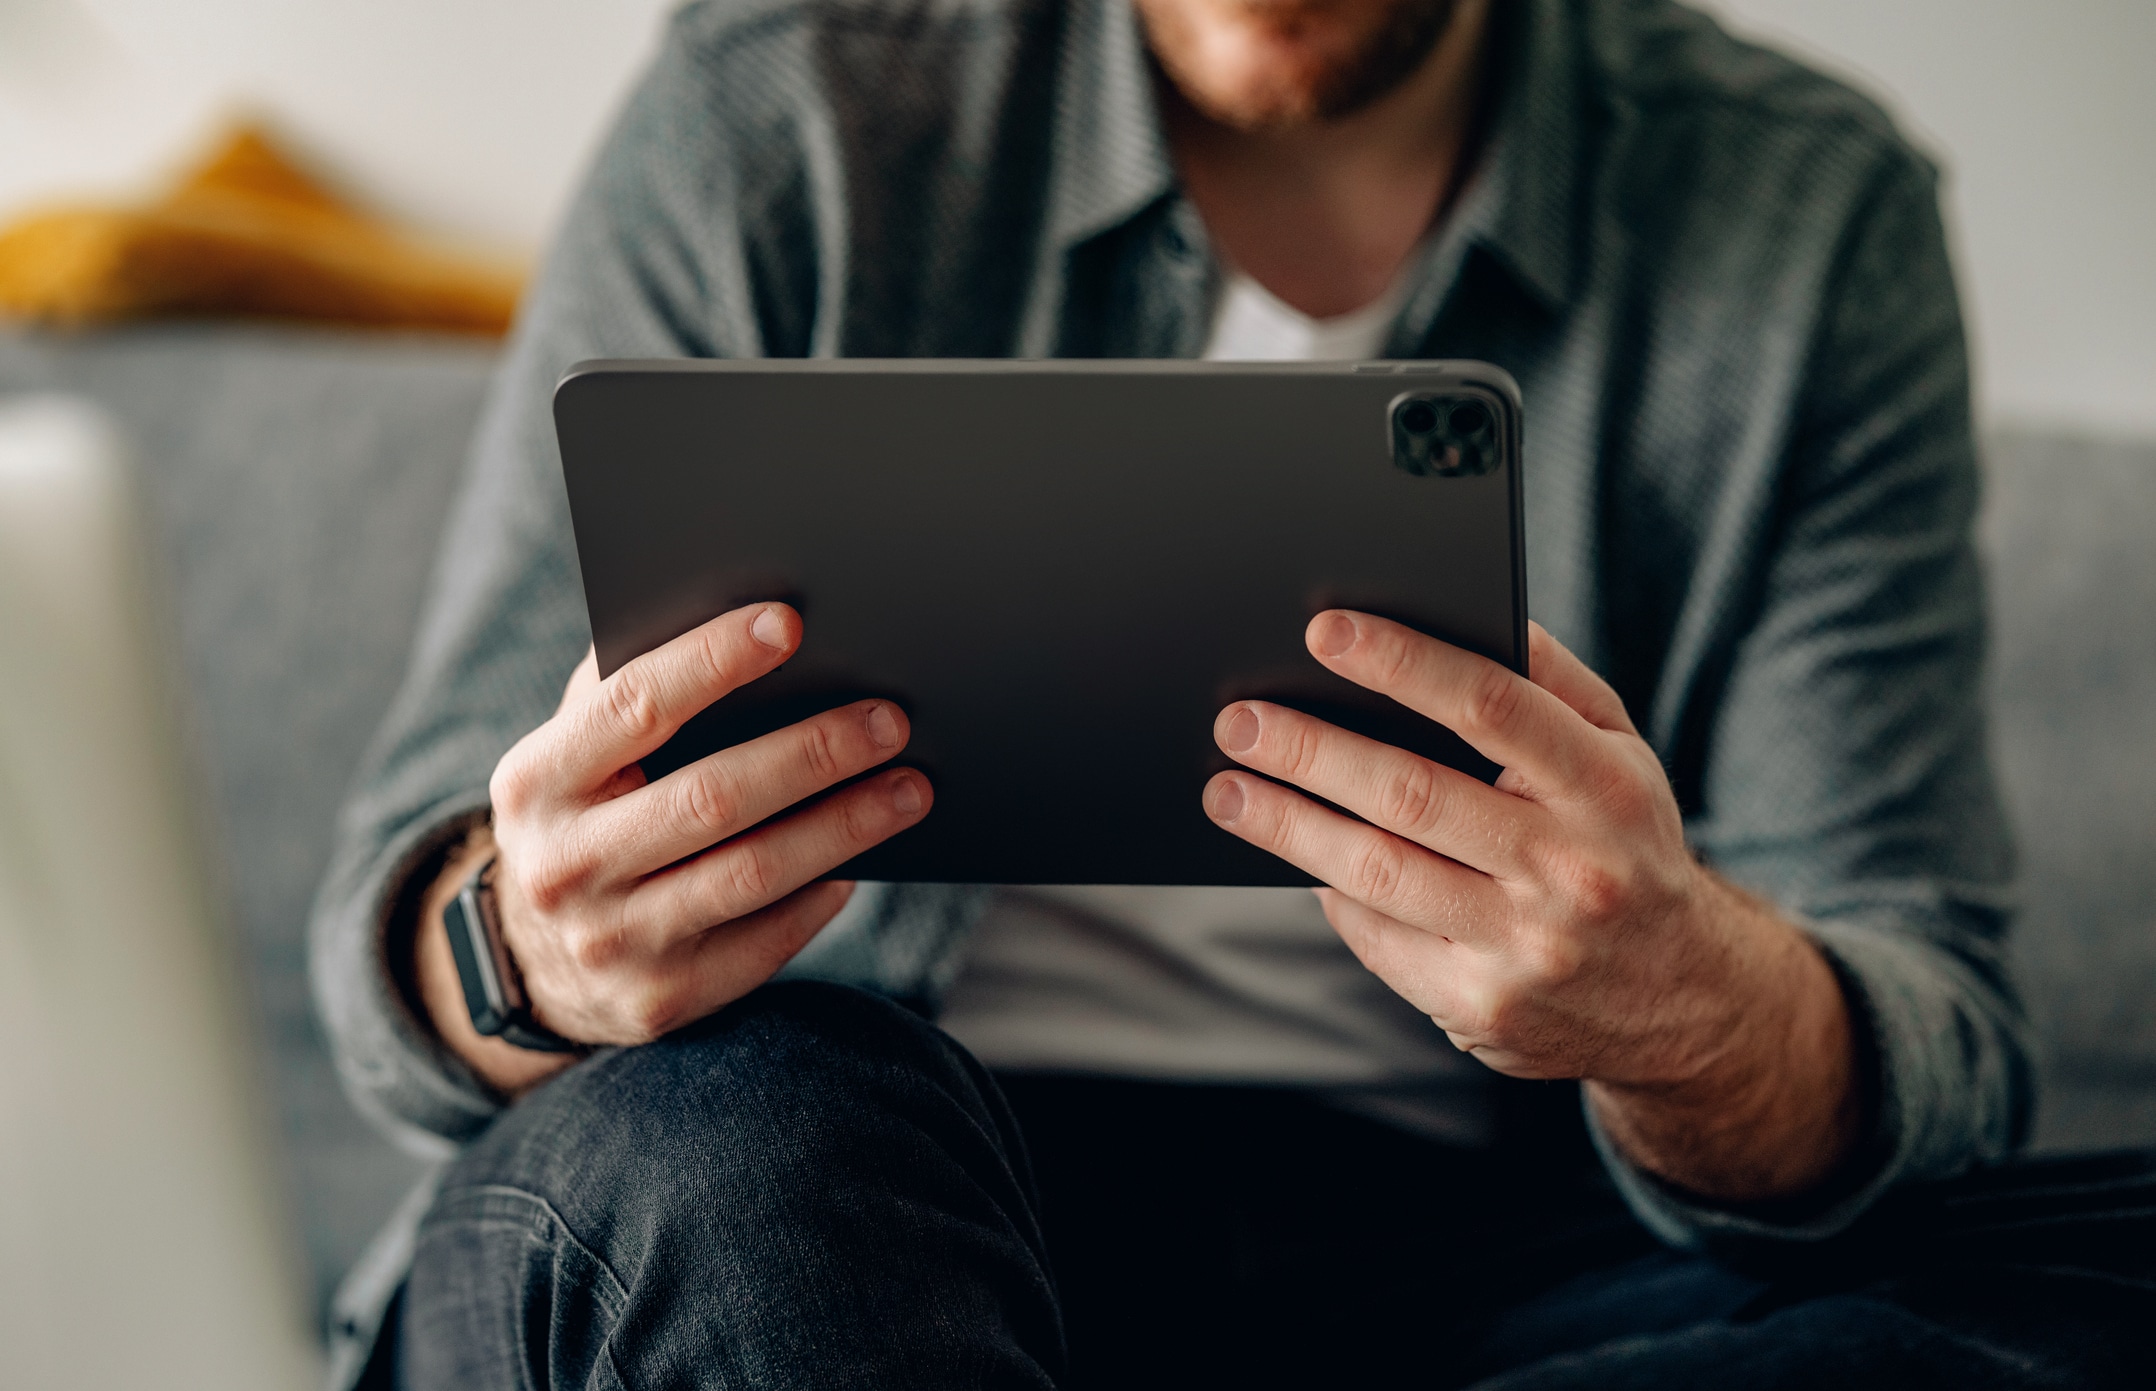 Man looking at online mental health resources on ipad